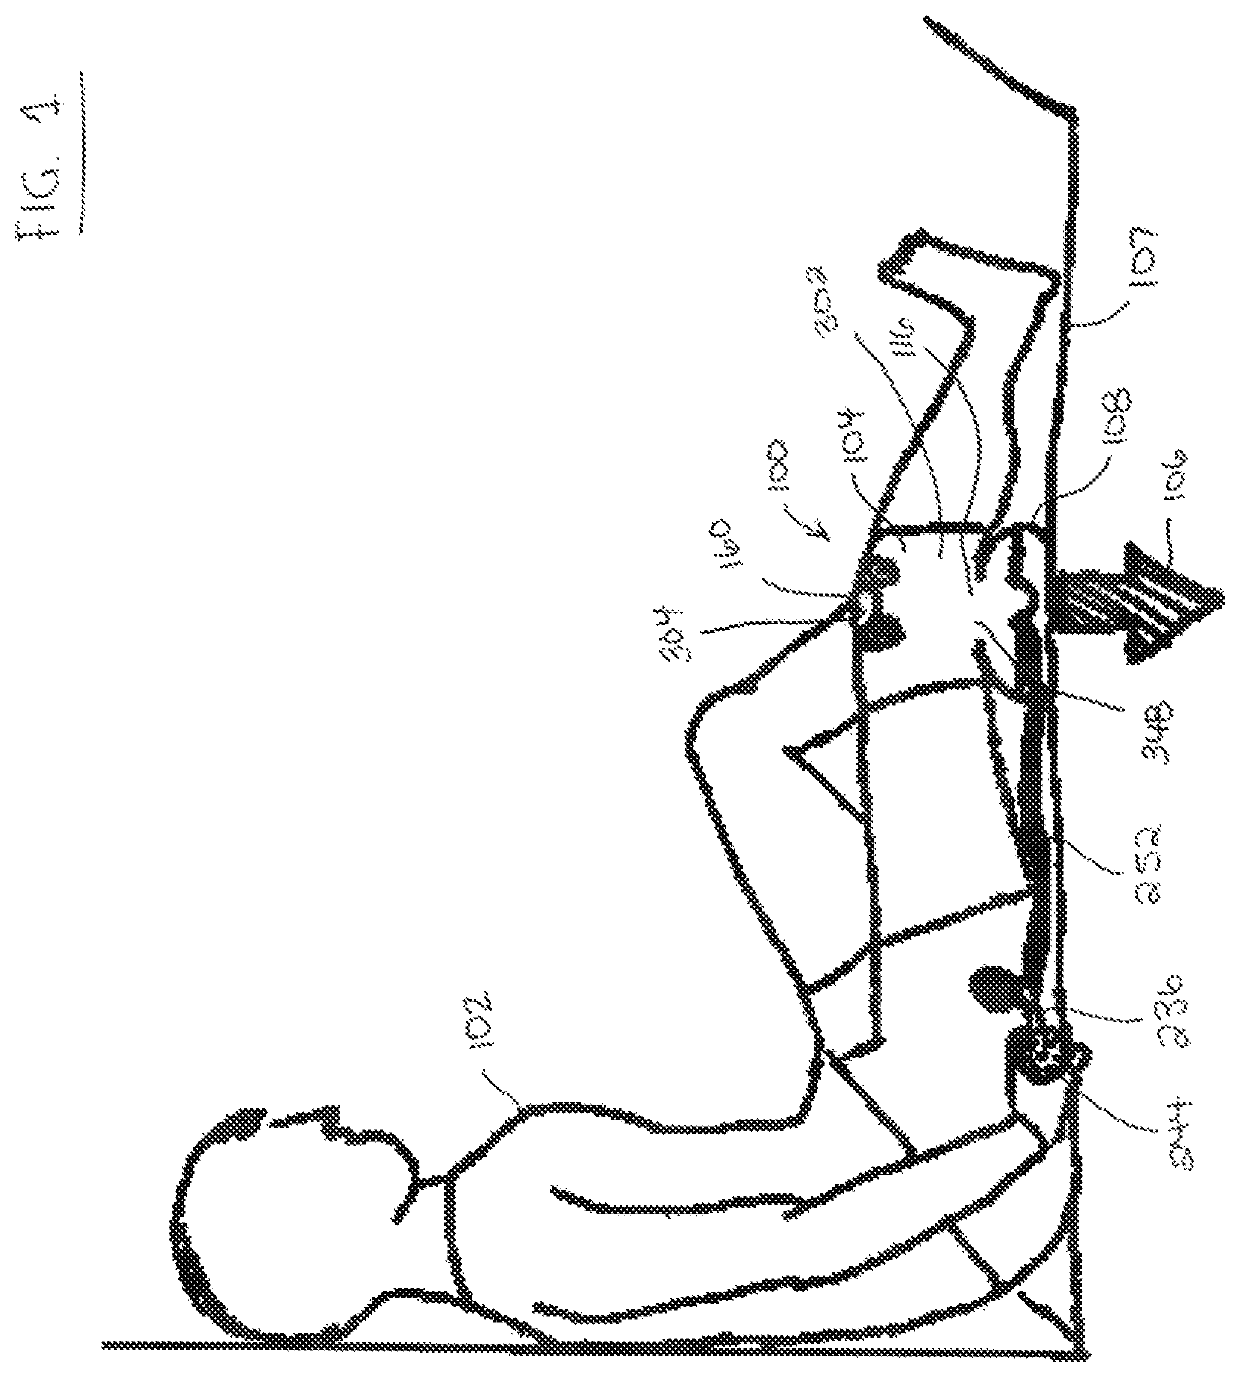 Rehabilitation system and method therefor